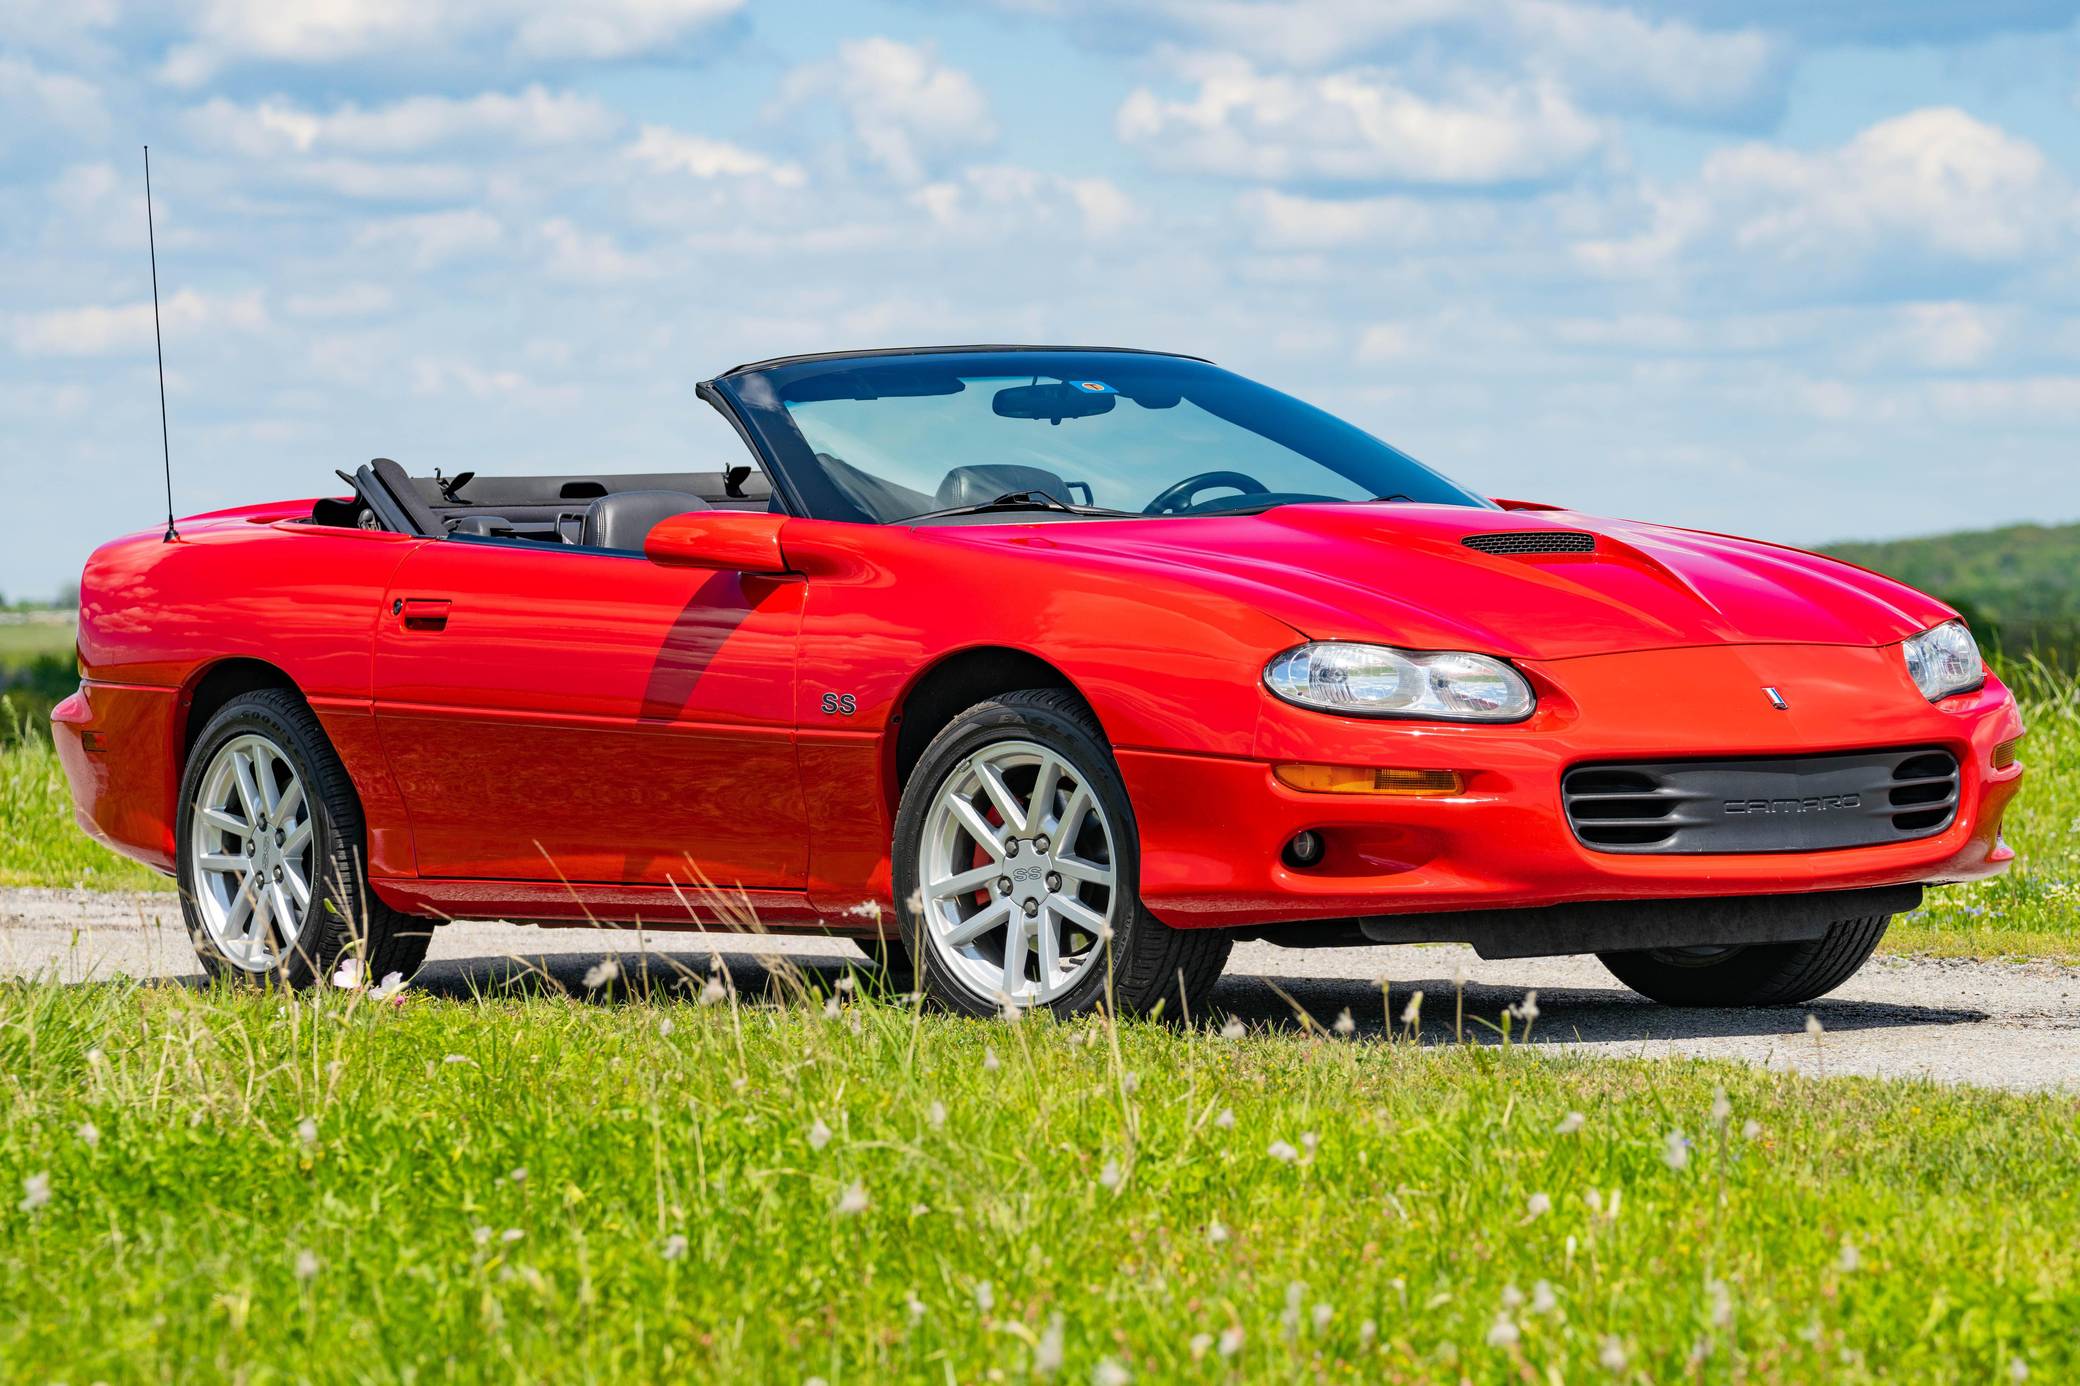 2001 Chevrolet Camaro Z28 SS Convertible for Sale - Cars & Bids